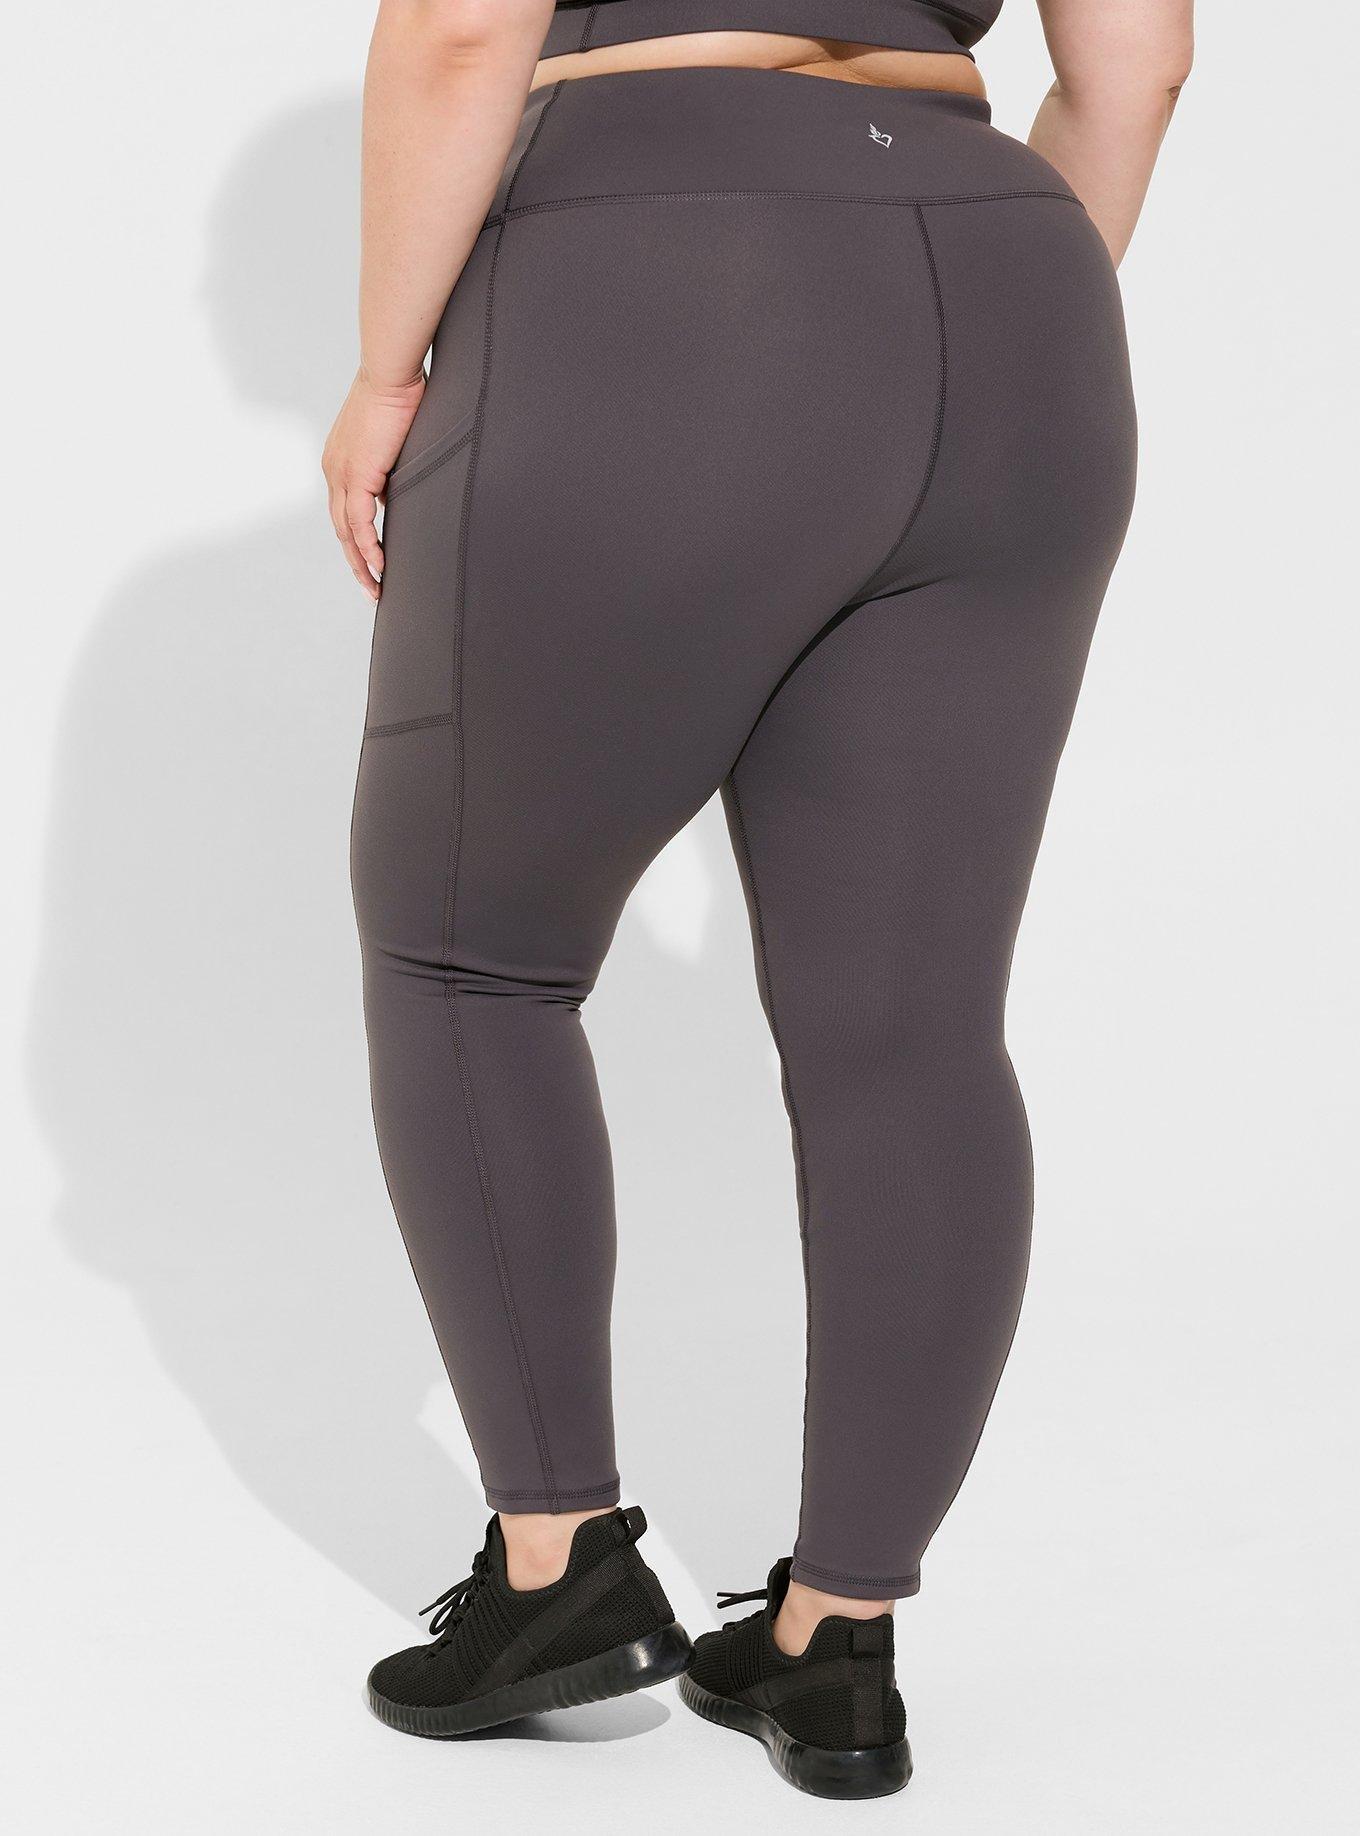 Torrid 3 (3x) PERFORMANCE CORE FULL LENGTH ACTIVE LEGGING WITH SIDE POCKETS  Nwts